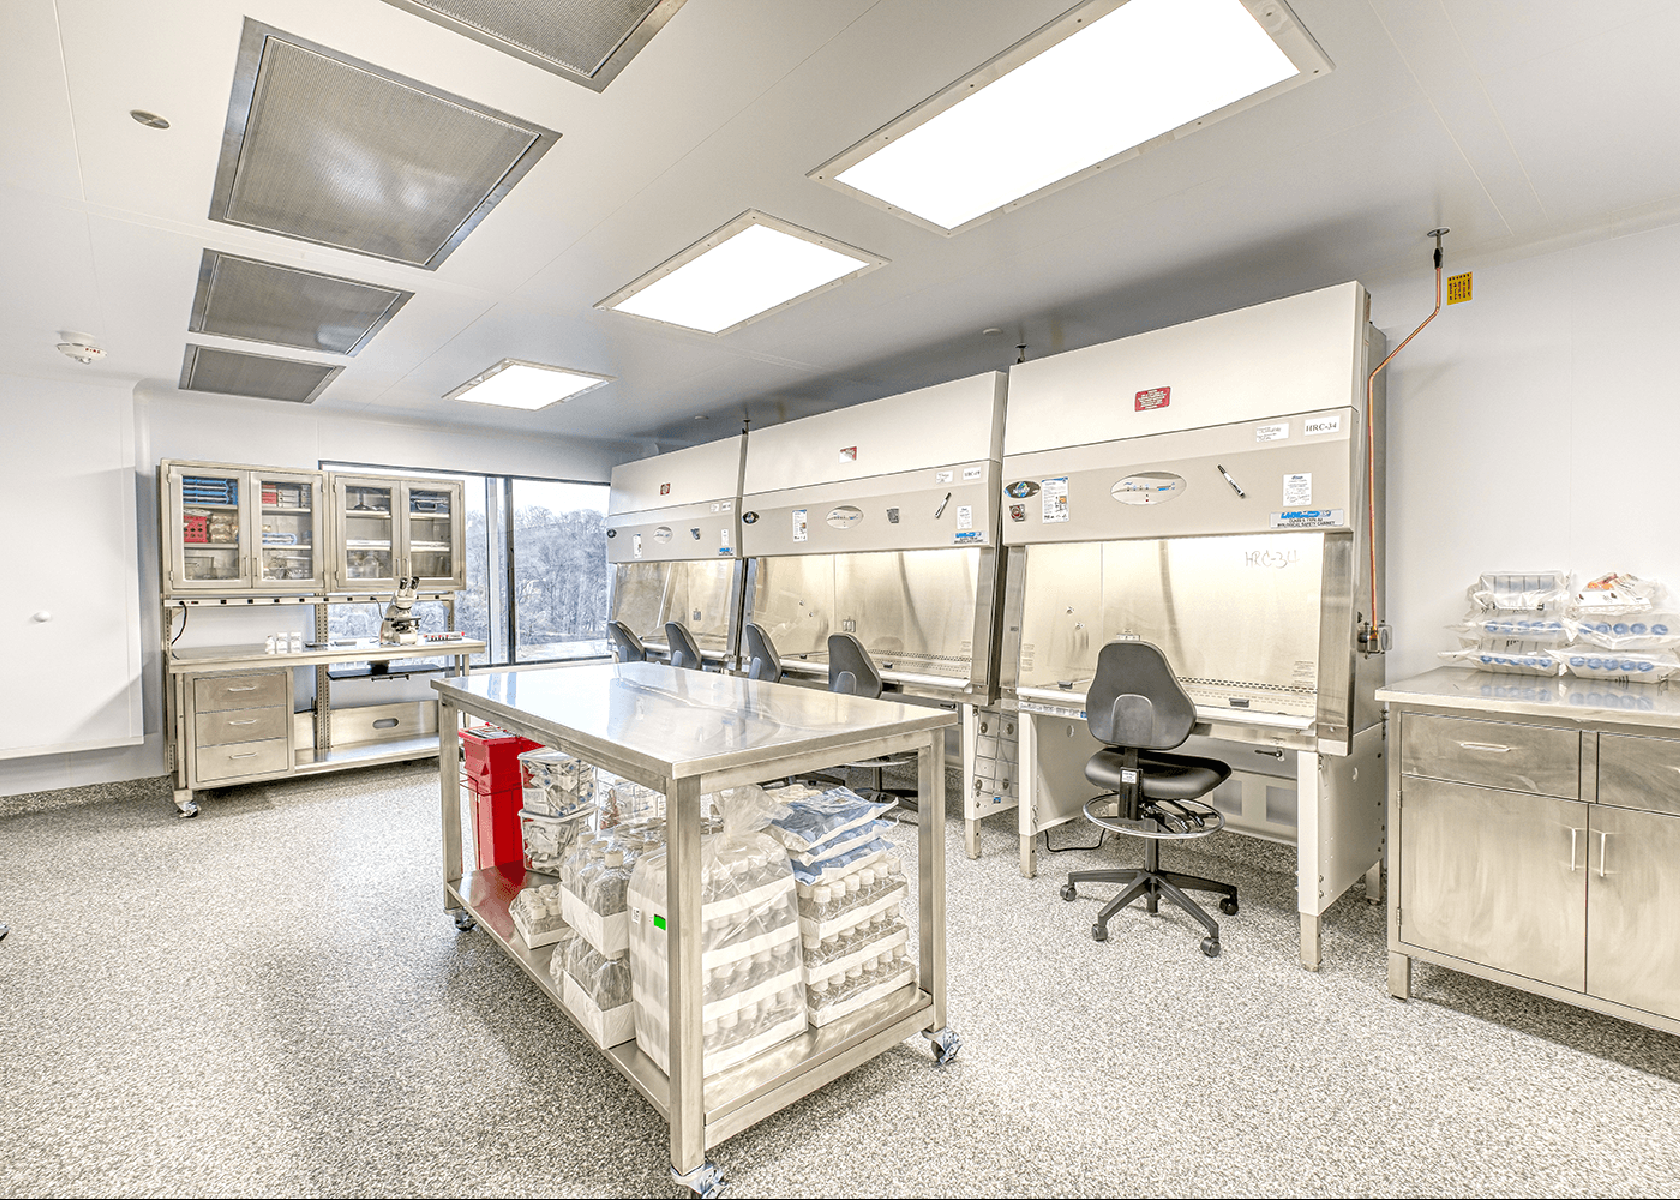 Wet lab space with stainless steel table